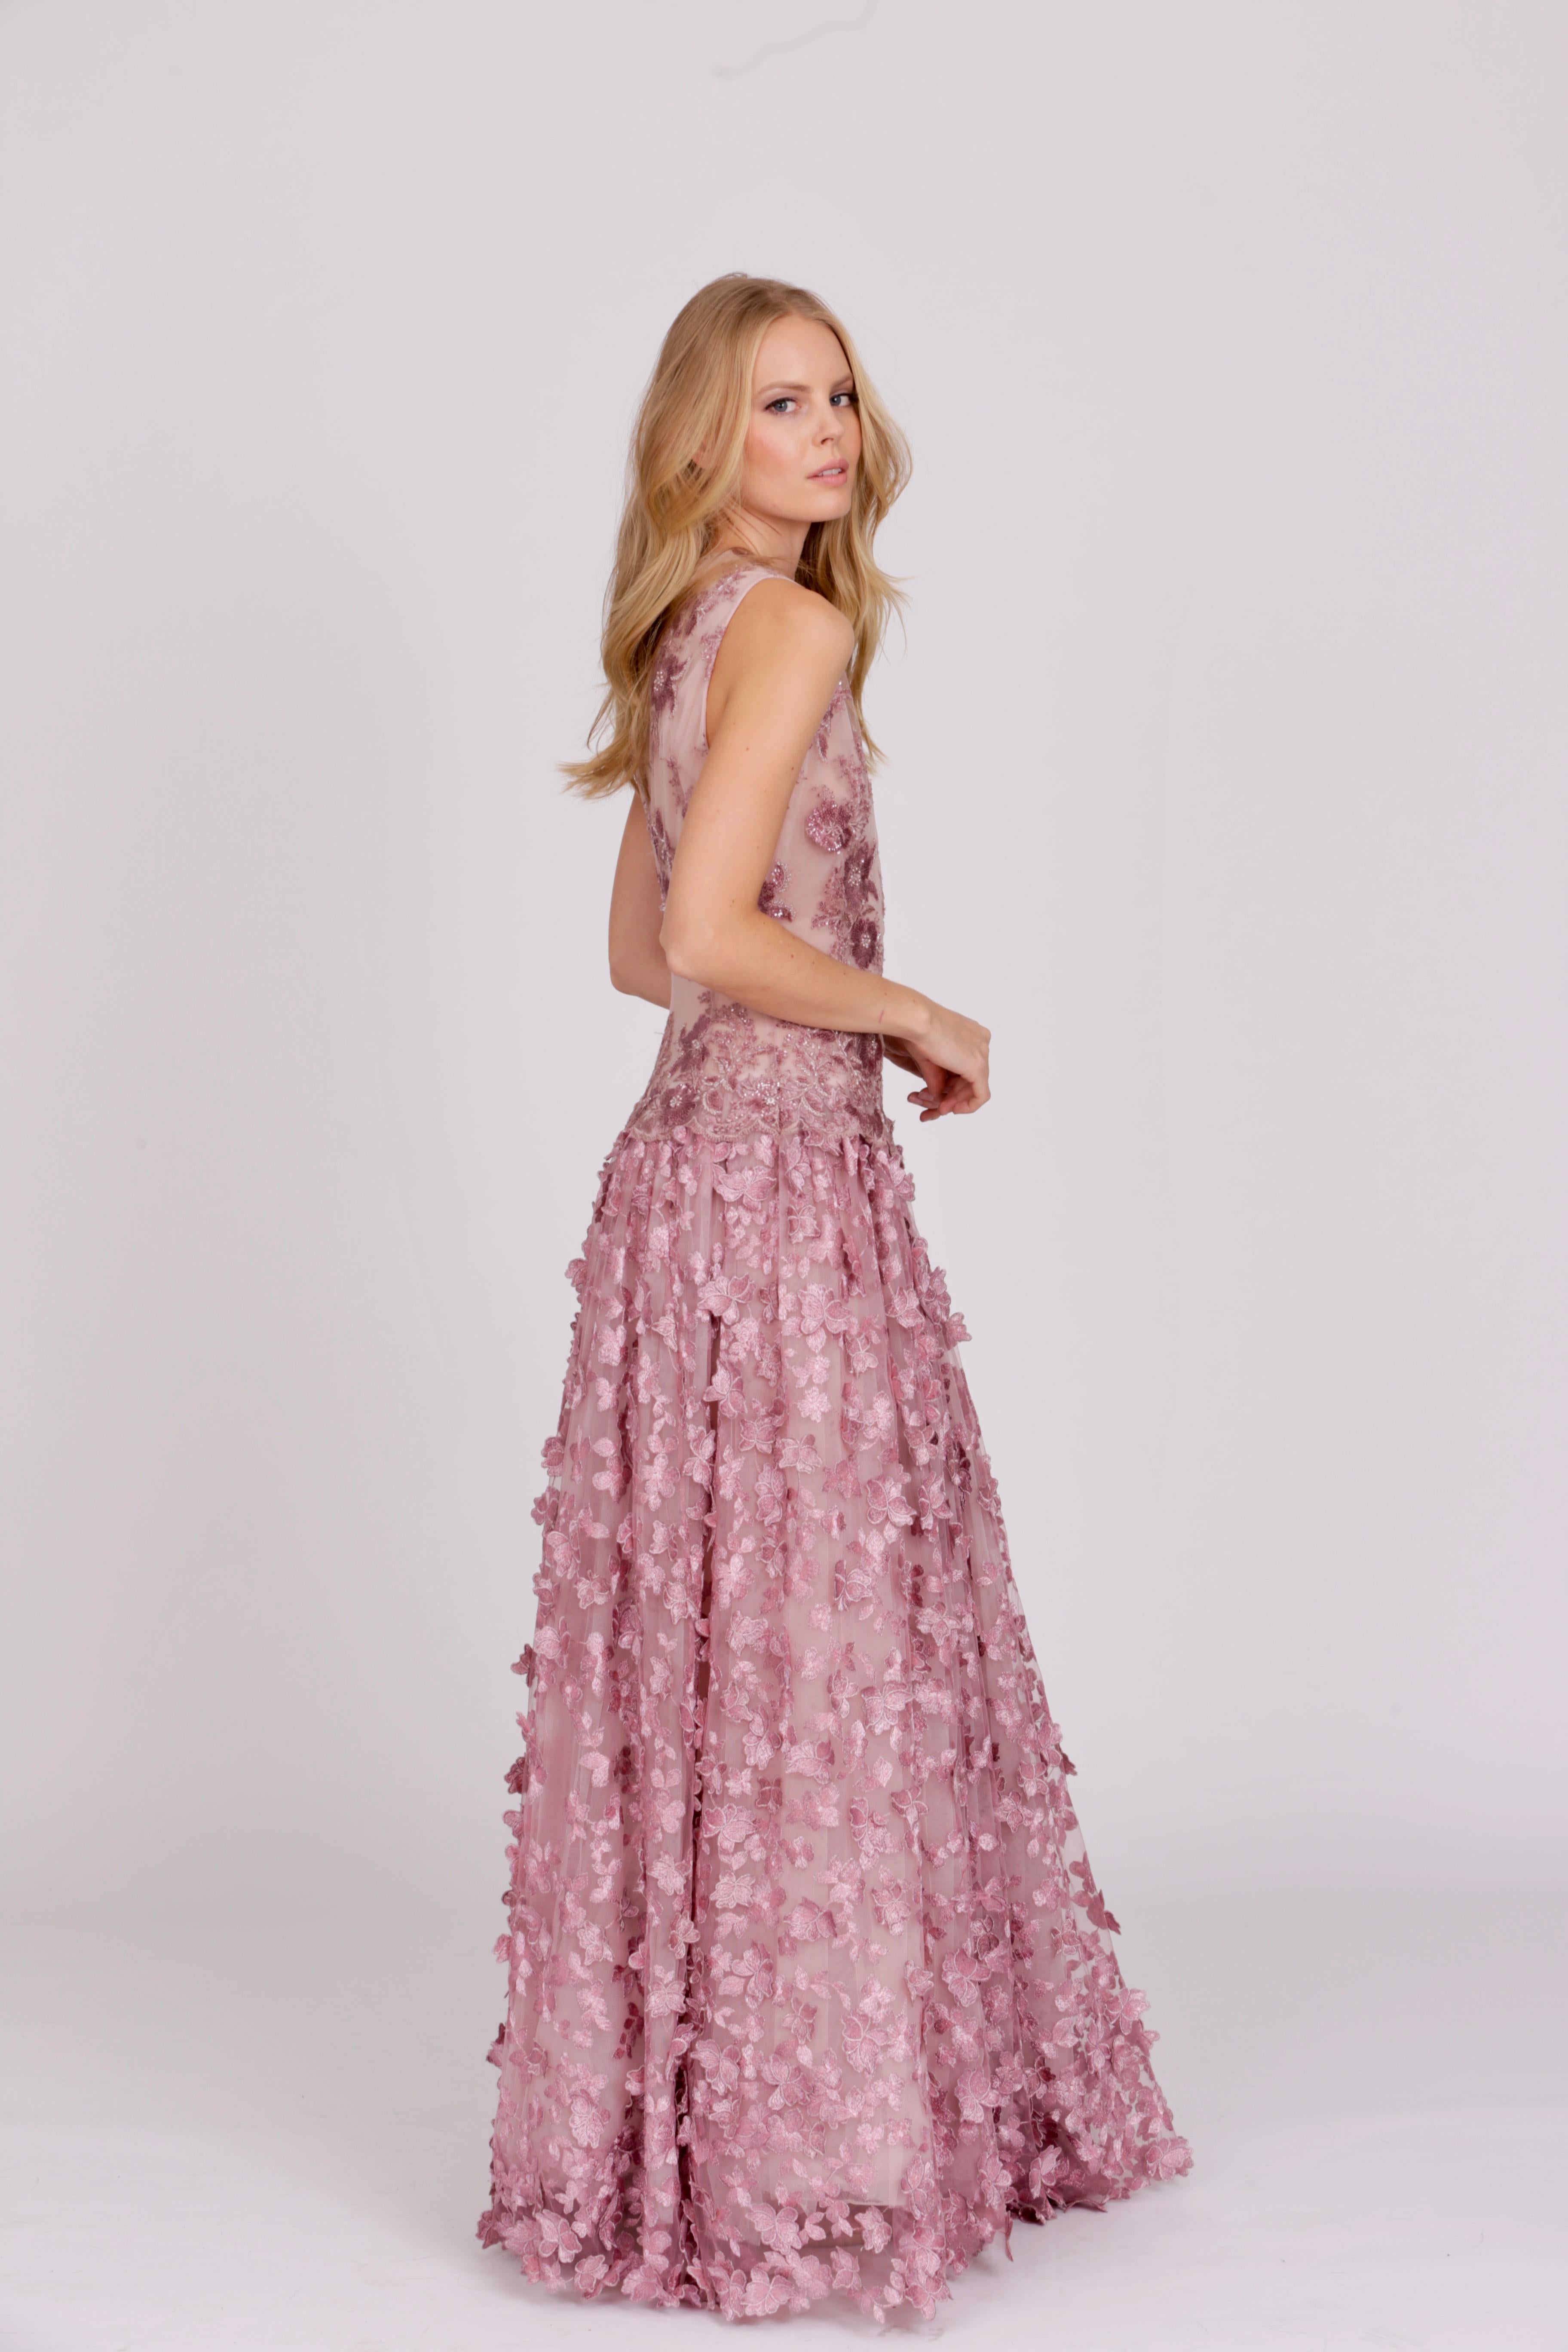 Pelush Pink Tulle Dress Gown With Three Dimensional Flowers And Embroidery - S For Sale 7